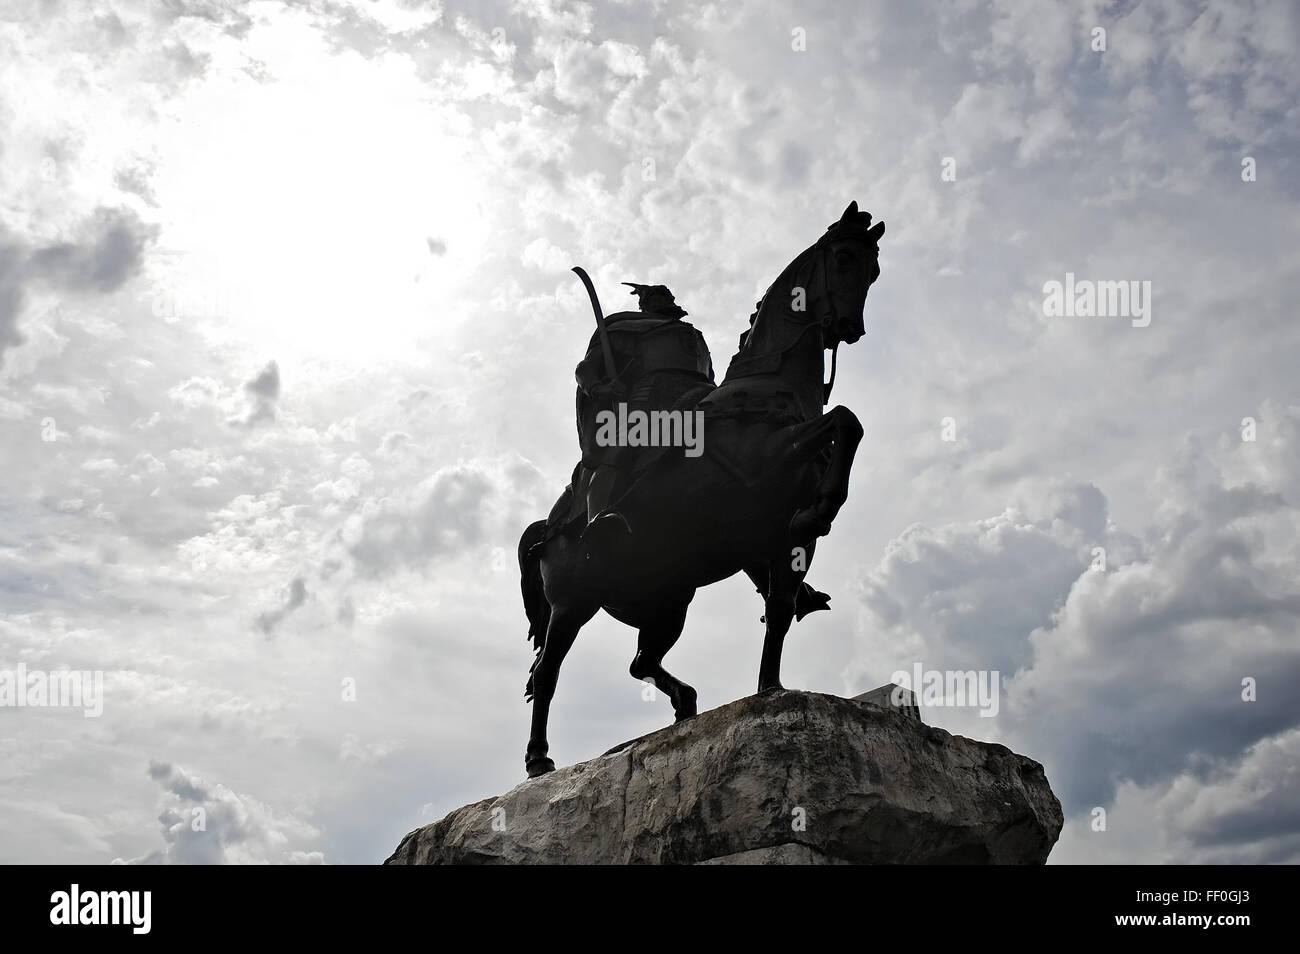 Statue of albanian national hero Skanderbeg, alsi known as George Castriot, is seen during daytime in Skanderbeg square Stock Photo